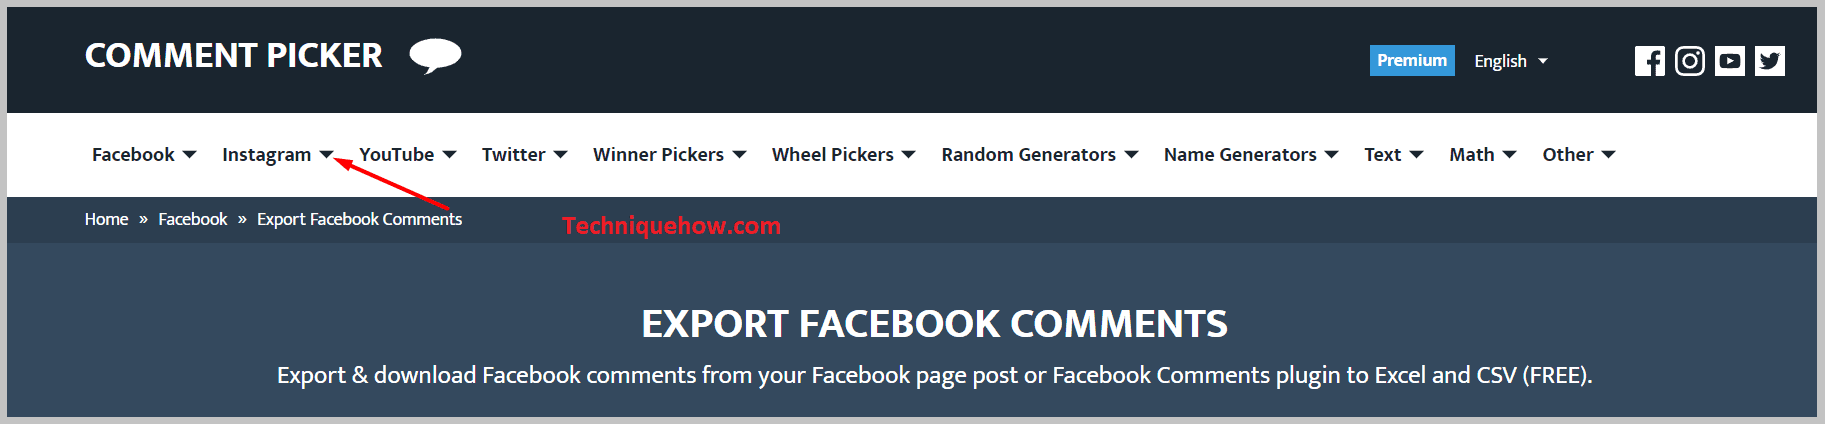 visit the website of the comment picker tool